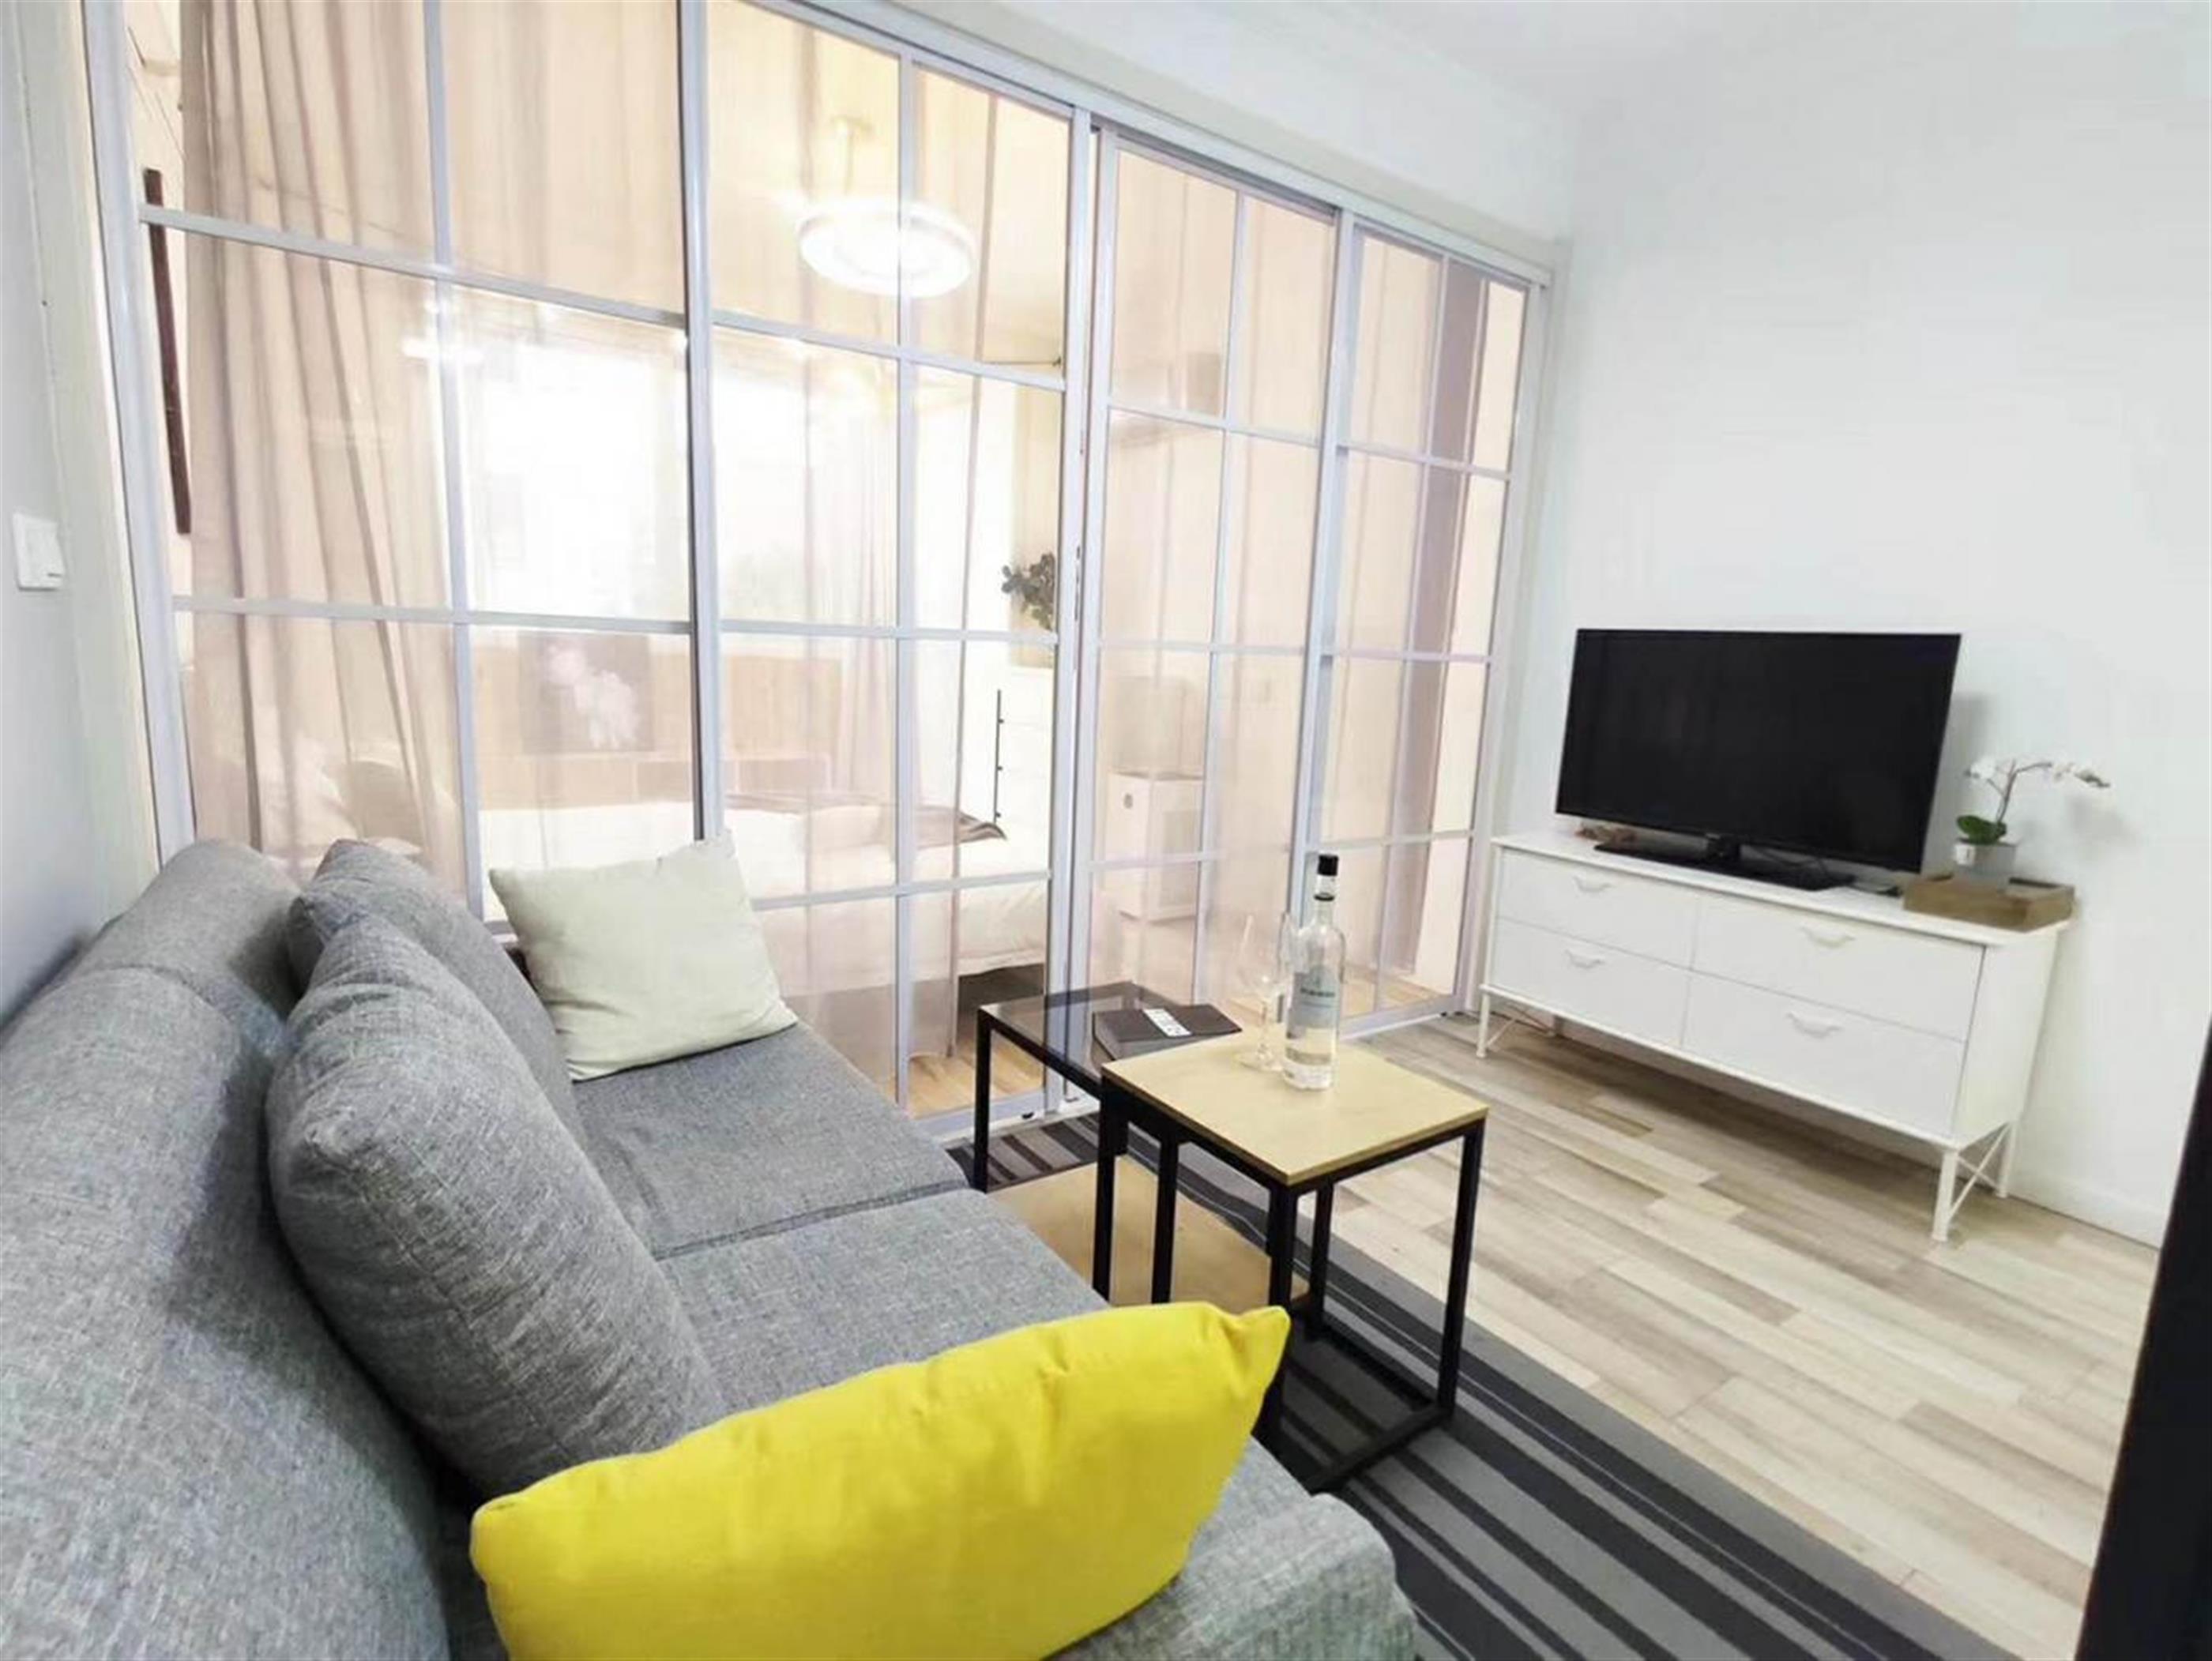 Bright living room Renovated Affordable Cozy 50sqm Xinhua Road Apt nr LN 3/4/10 for Rent in Shanghai